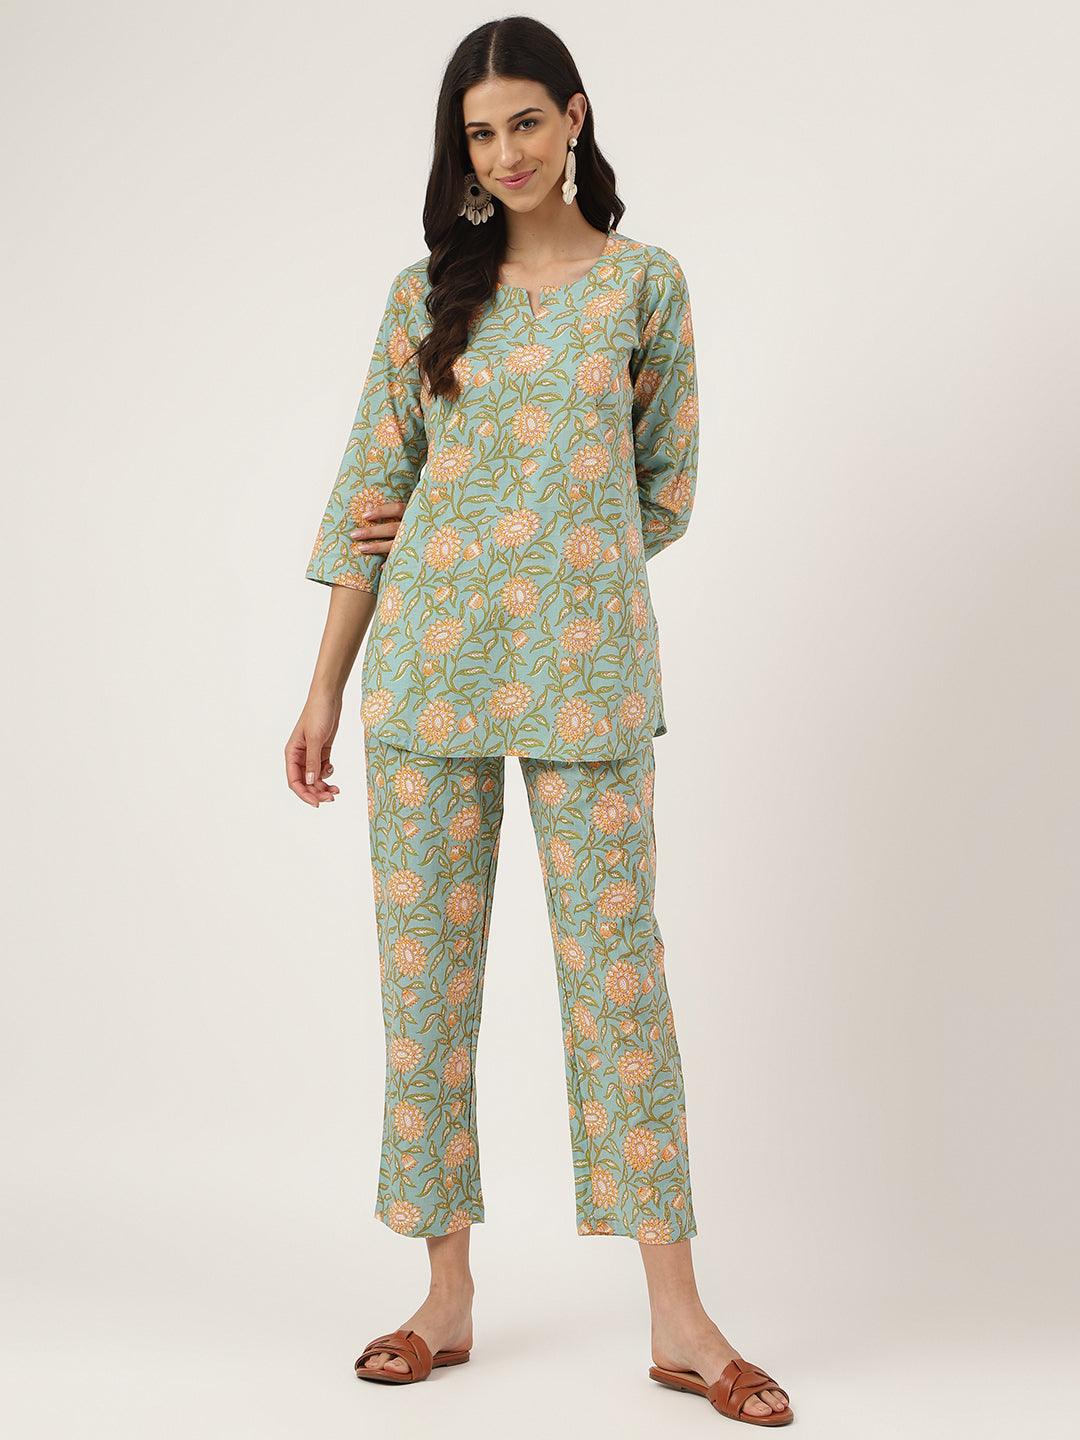 Printed Cotton Sleep Wear/ Night Wear/ Lazy Wear/ Lounge Wear/ Night Suit,  Pink at Rs 430/piece in Jaipur